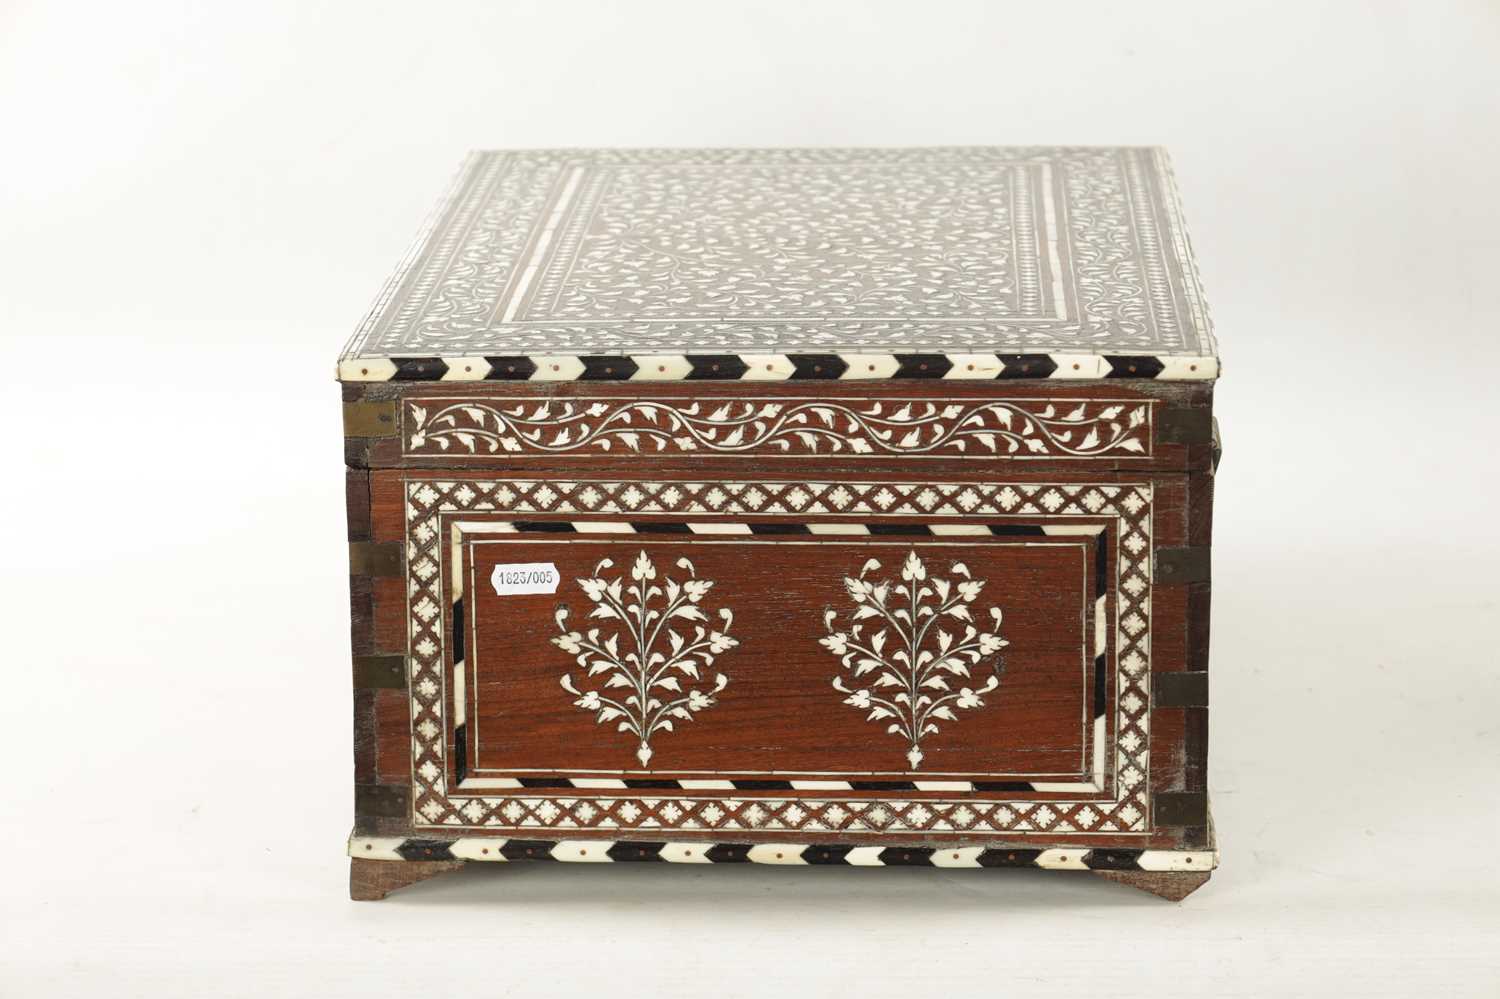 A LARGE LATE 19TH CENTURY ANGLO-INDIAN IVORY AND EBONY INLAID WORKBOX - Image 9 of 10